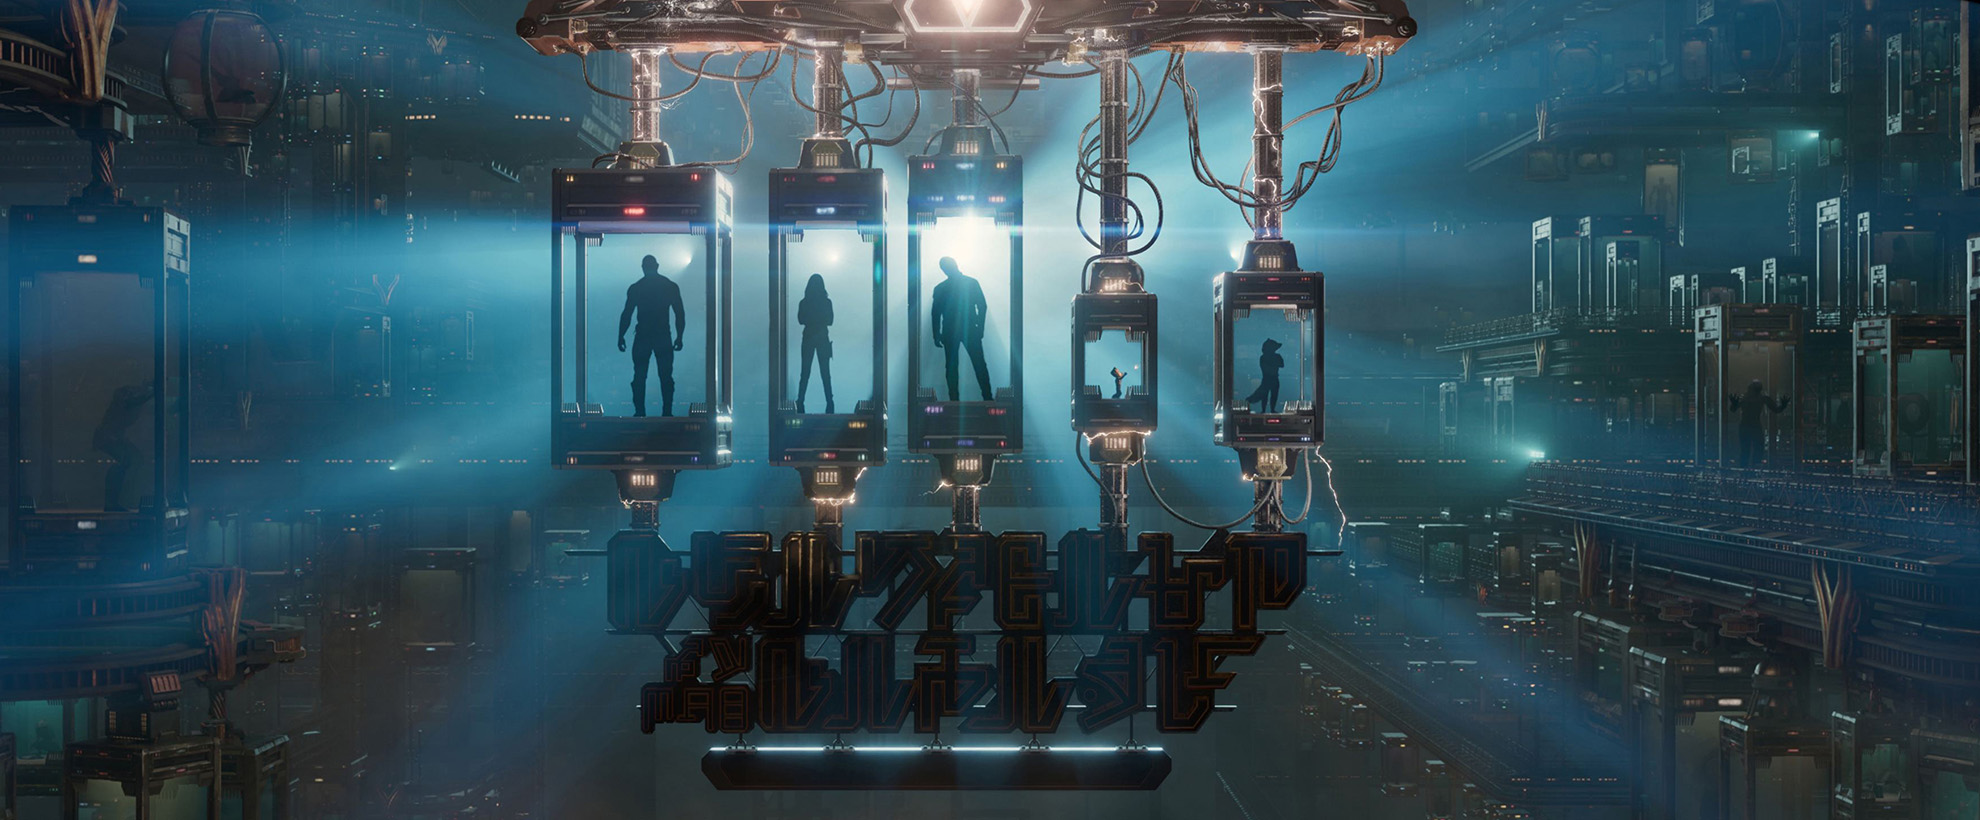 In a large, futuristic warehouse, there are clear box/cages suspended in air. In the center of the image, five of those clear boxes hang in the room. In each box is a main character from Marvel's Guardians of the Galaxy. We only see the silhouettes of each character